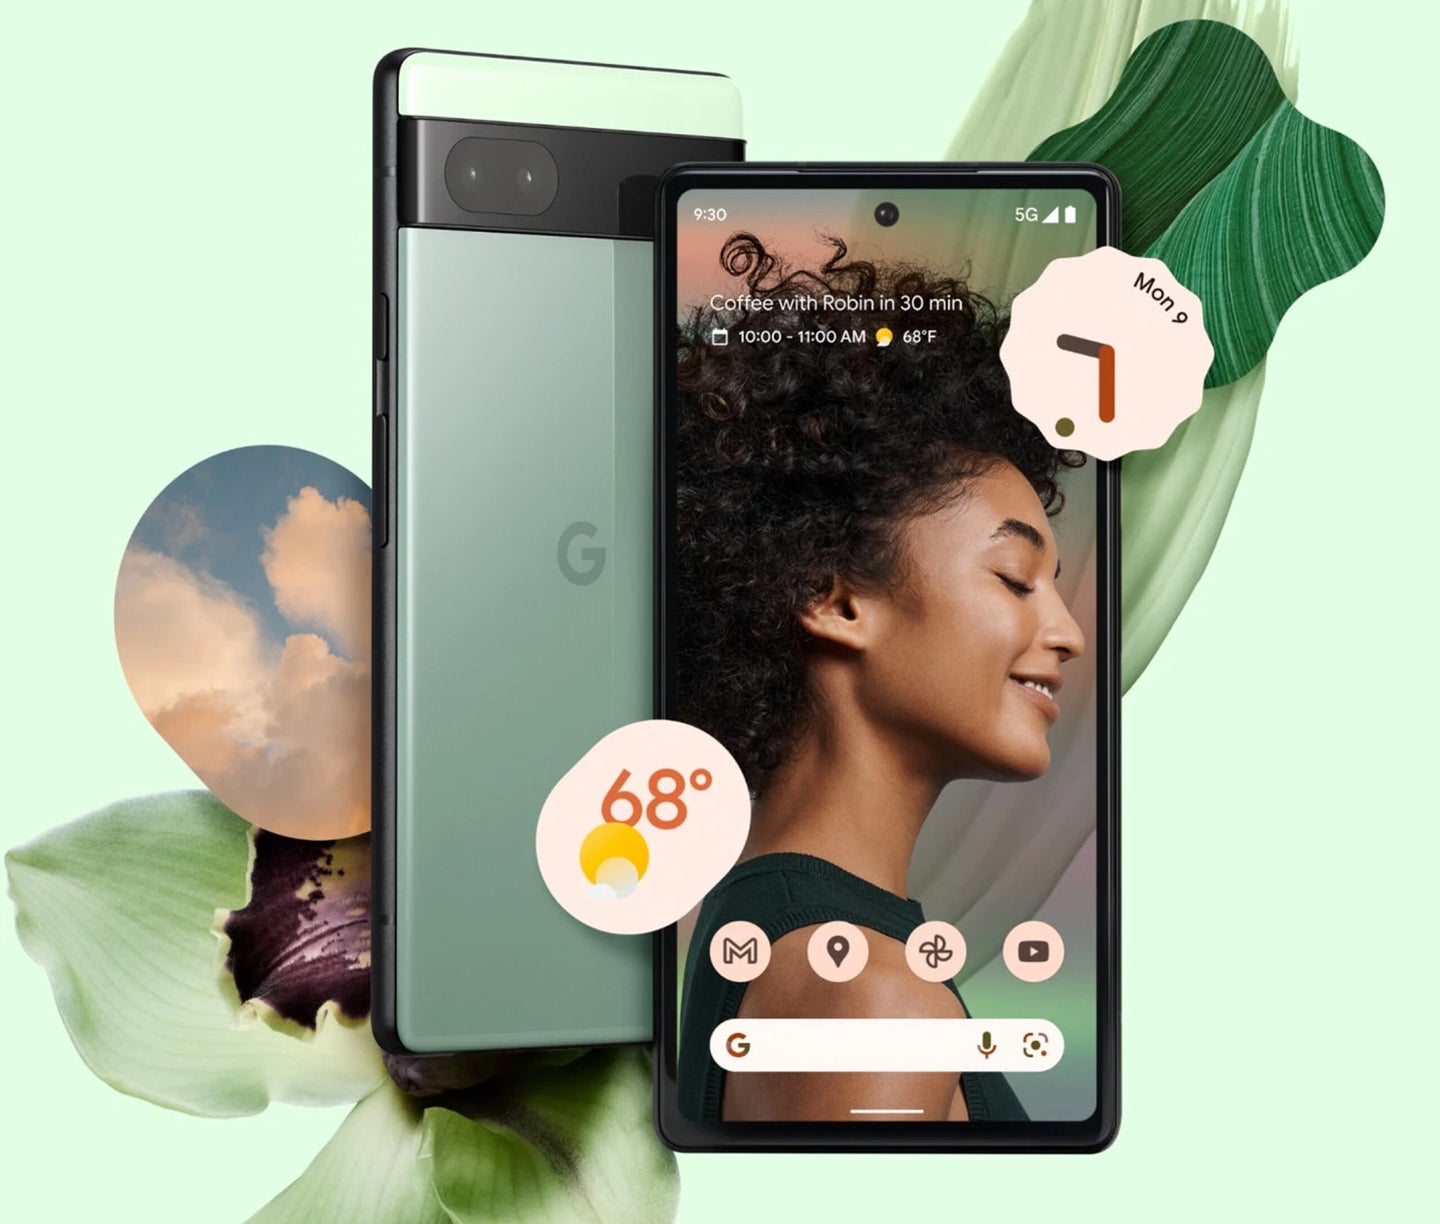 The Pixel 6a brings the company’s flagship Tensor processor to a mid-range phone for the first time.